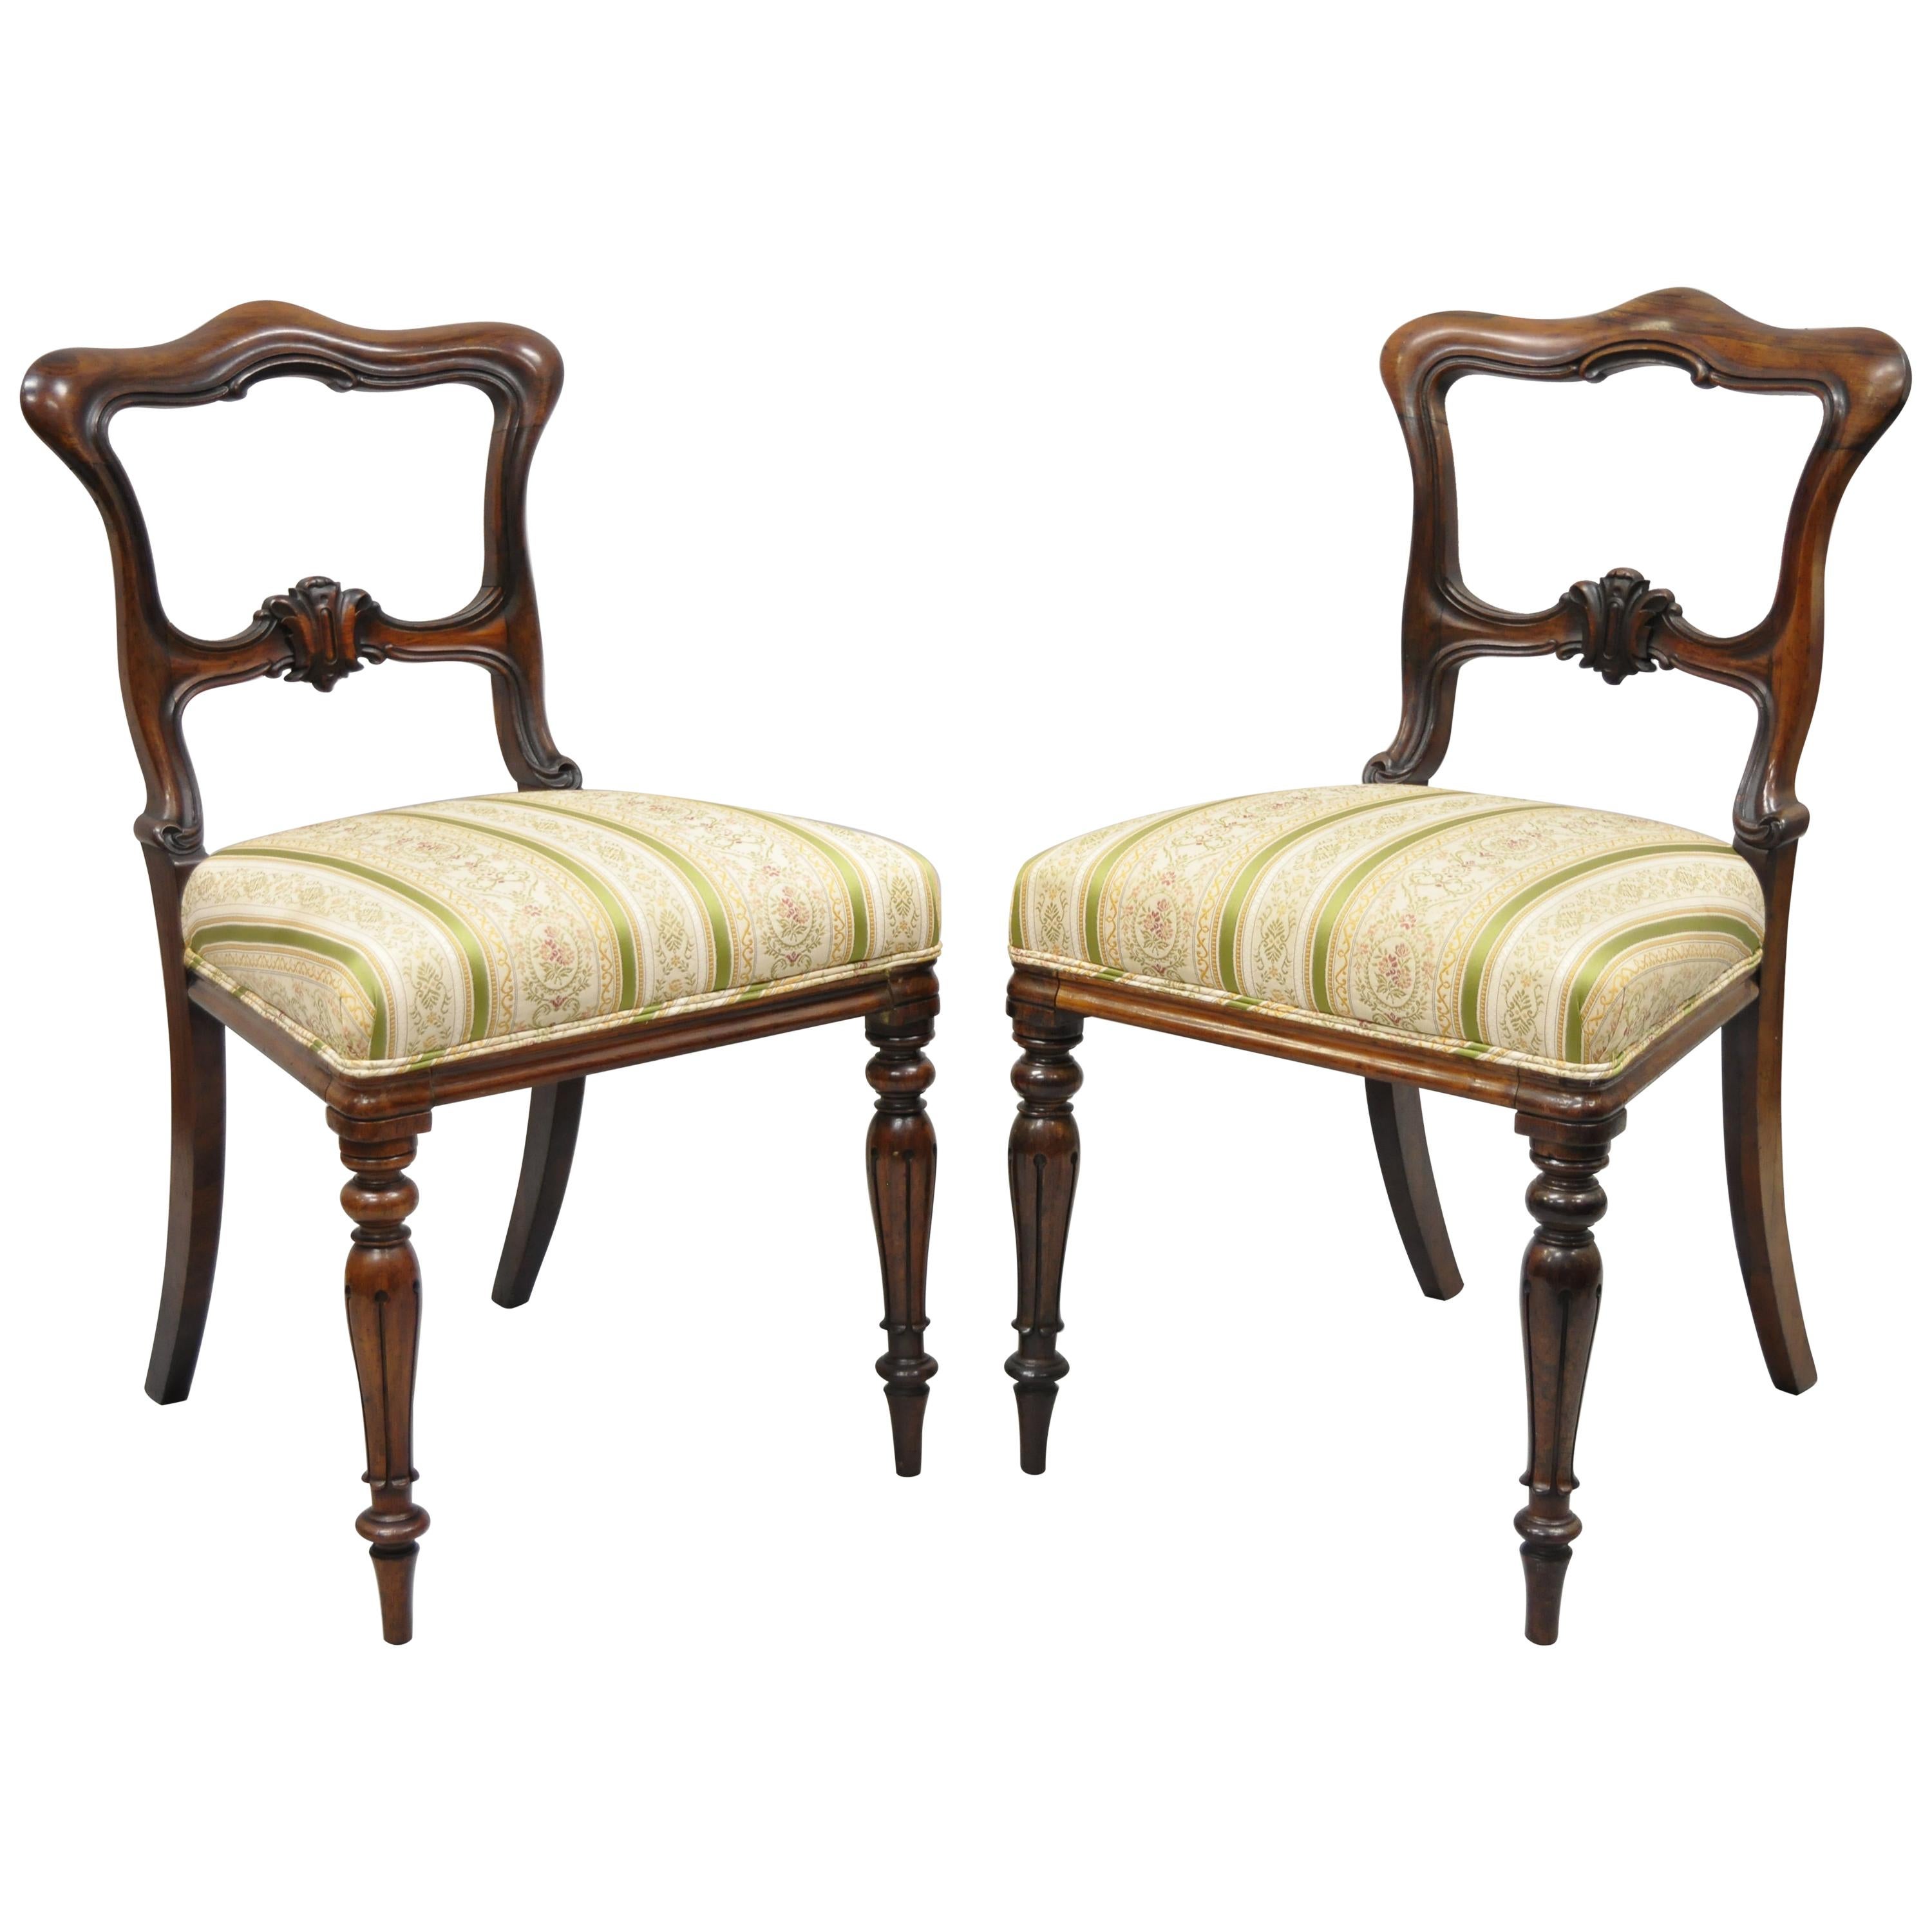 Victorian Art Nouveau Transitional Rosewood Carved Parlor Side Chairs, a Pair For Sale